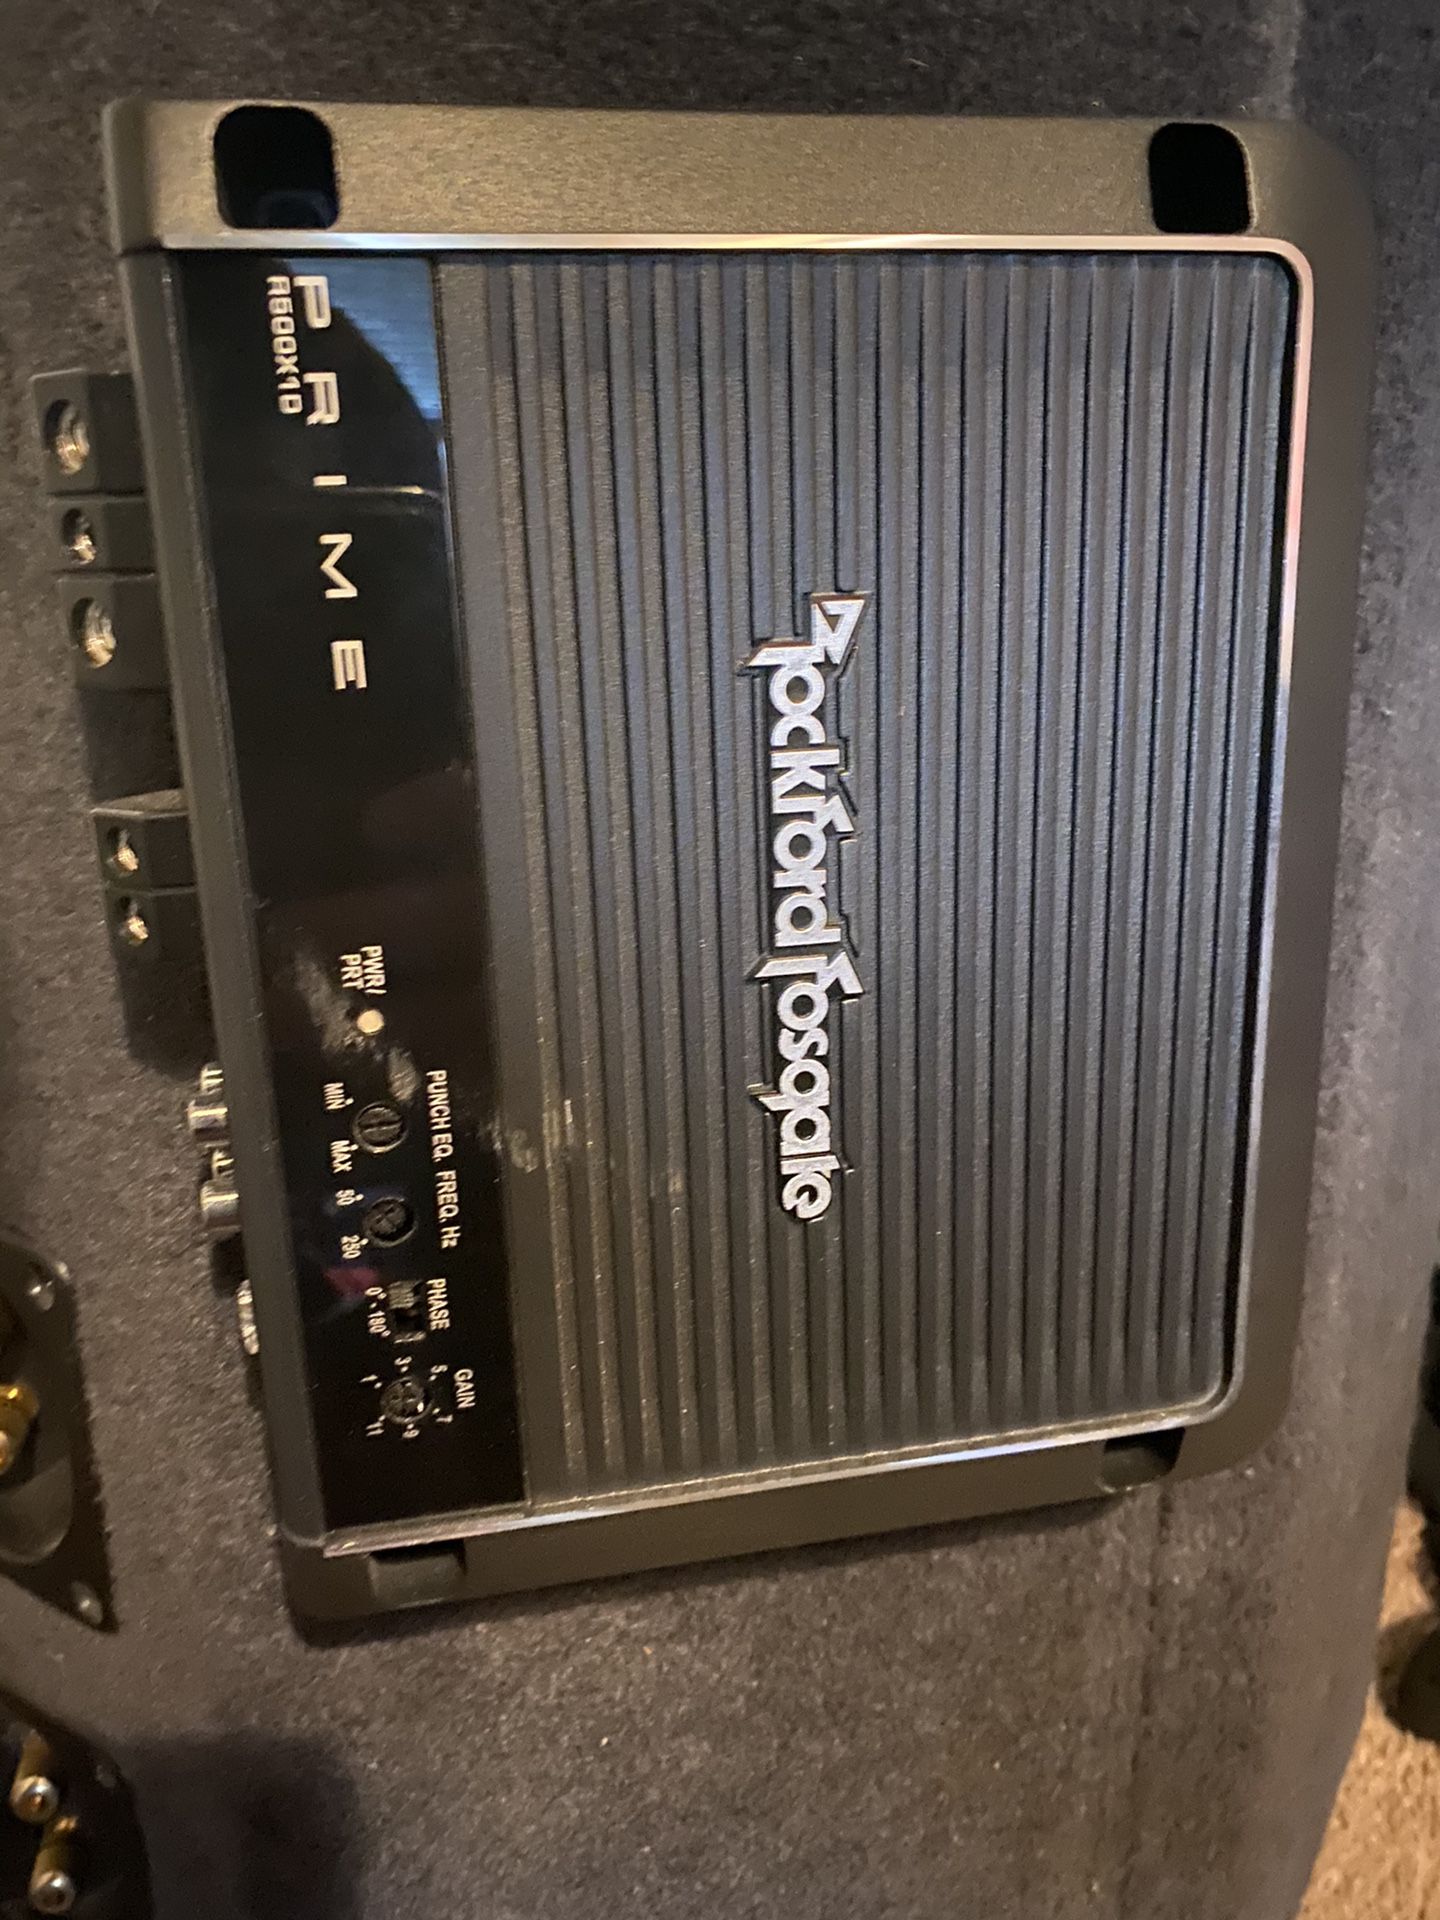 Rockford Fosgate 500 ws amp 2 12’in subs